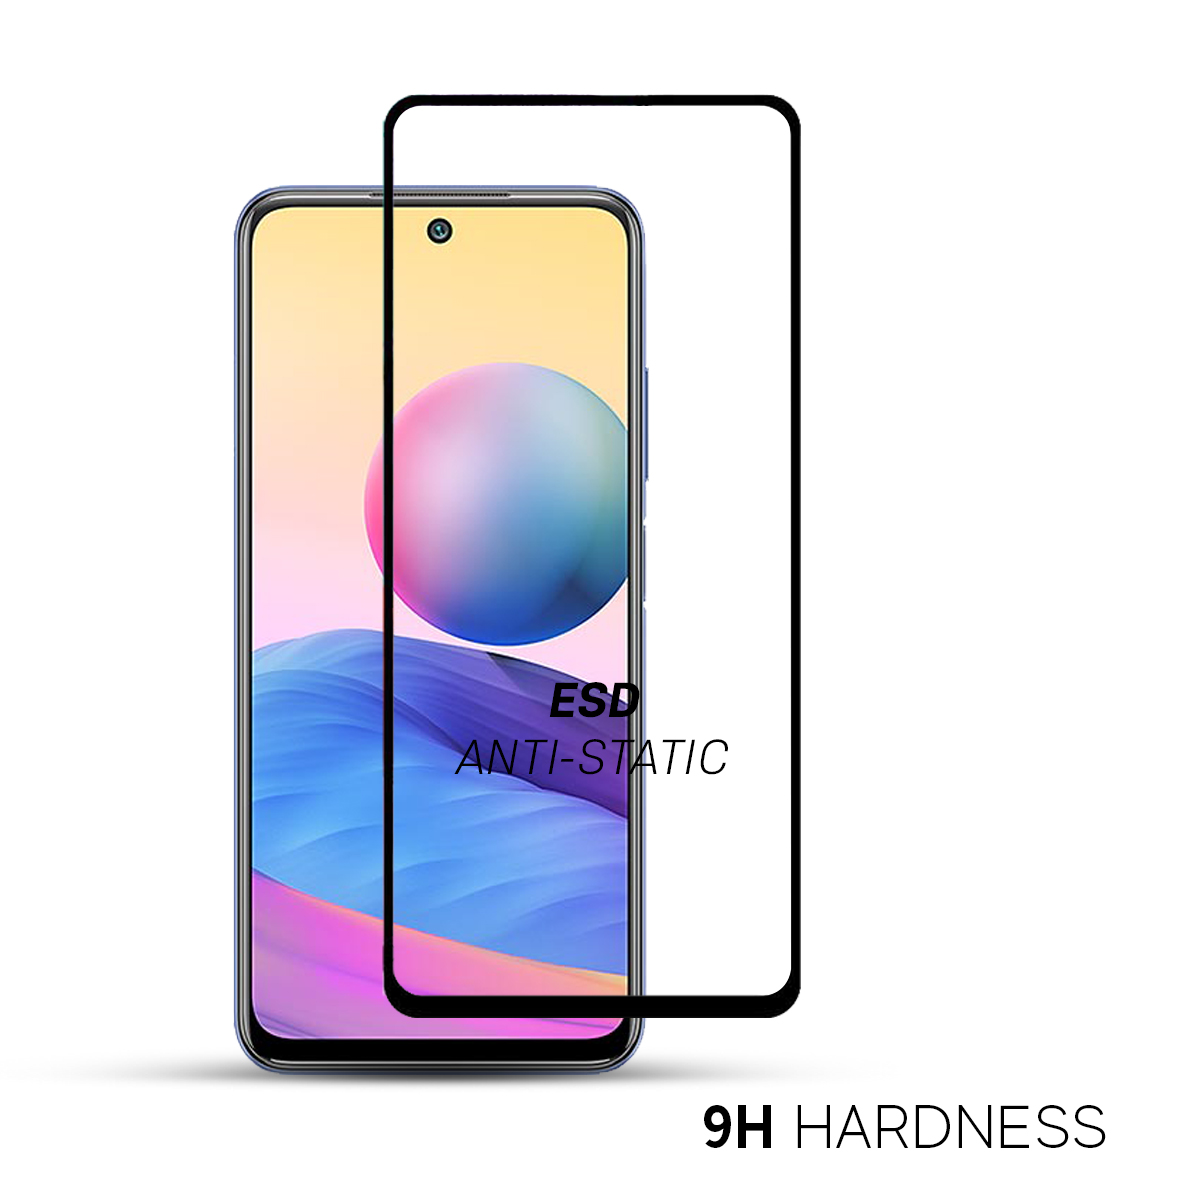 Beyox ESD Anti Static 5D Glass for Redmi Note 9 Pro